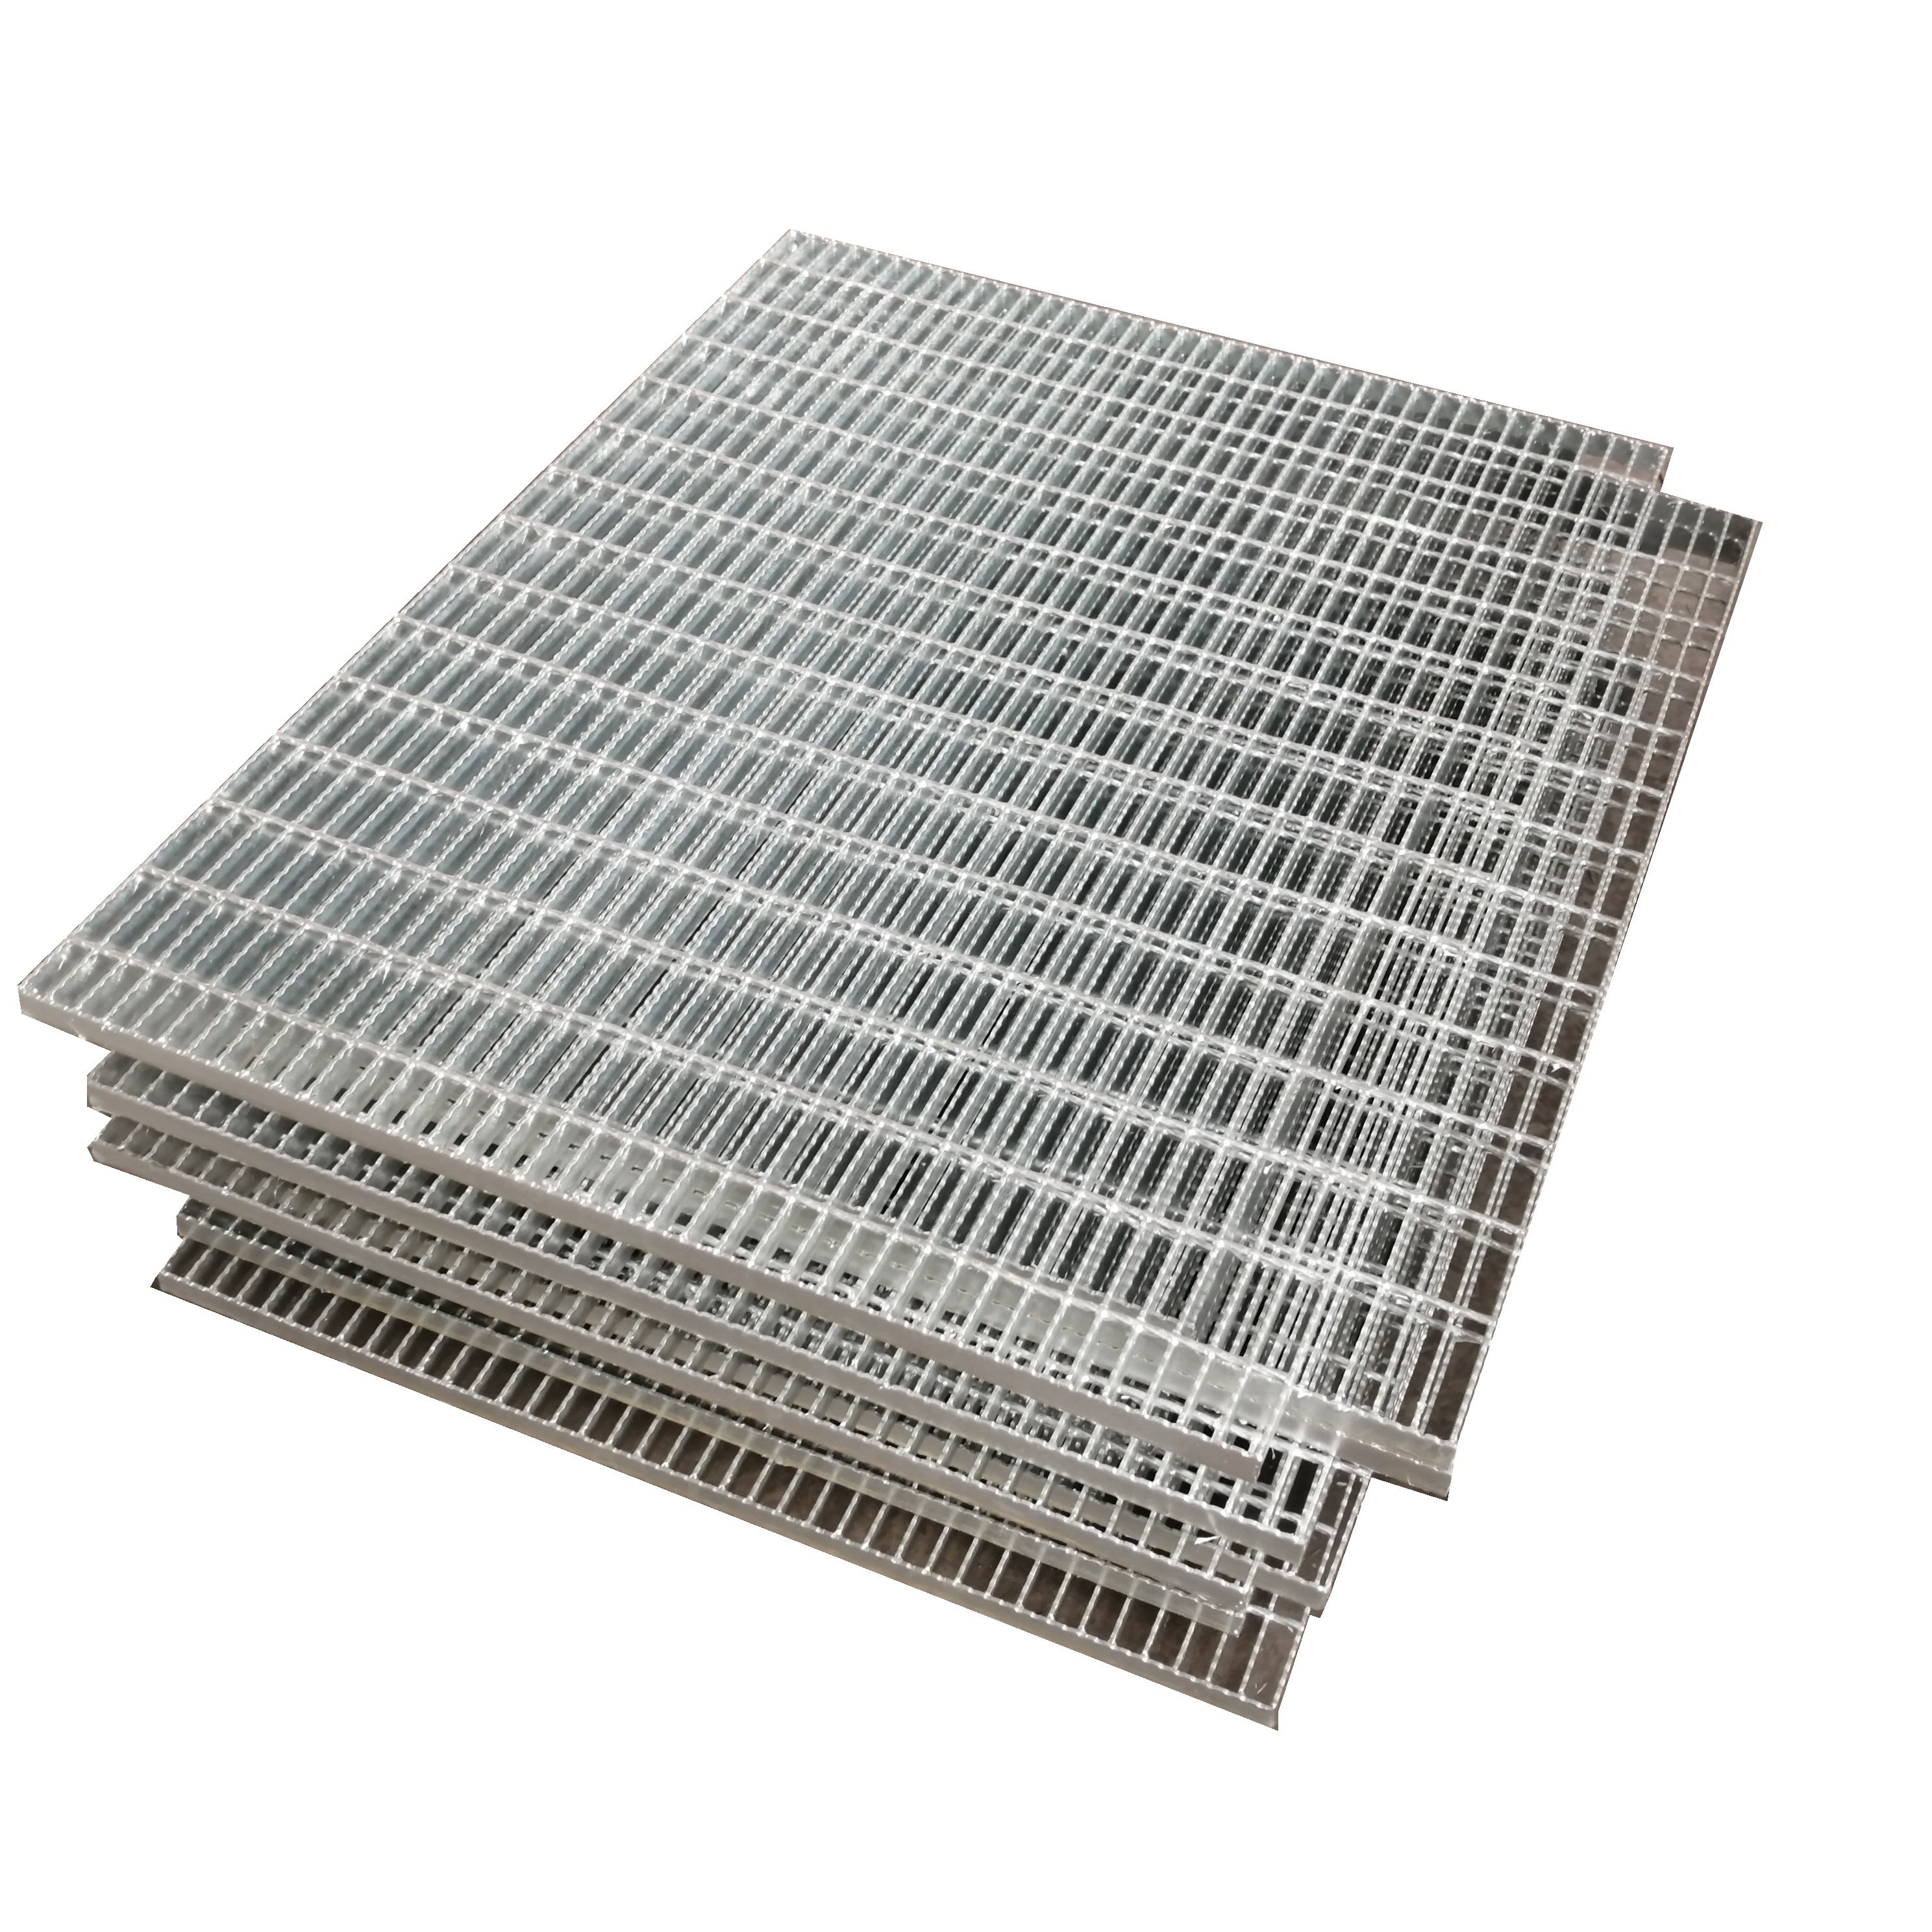 Reliable Supplier Steel Workshop Building - 30×30 30x3mm Ss Trench Grating Metal Plates For Driveways  – Xiantang